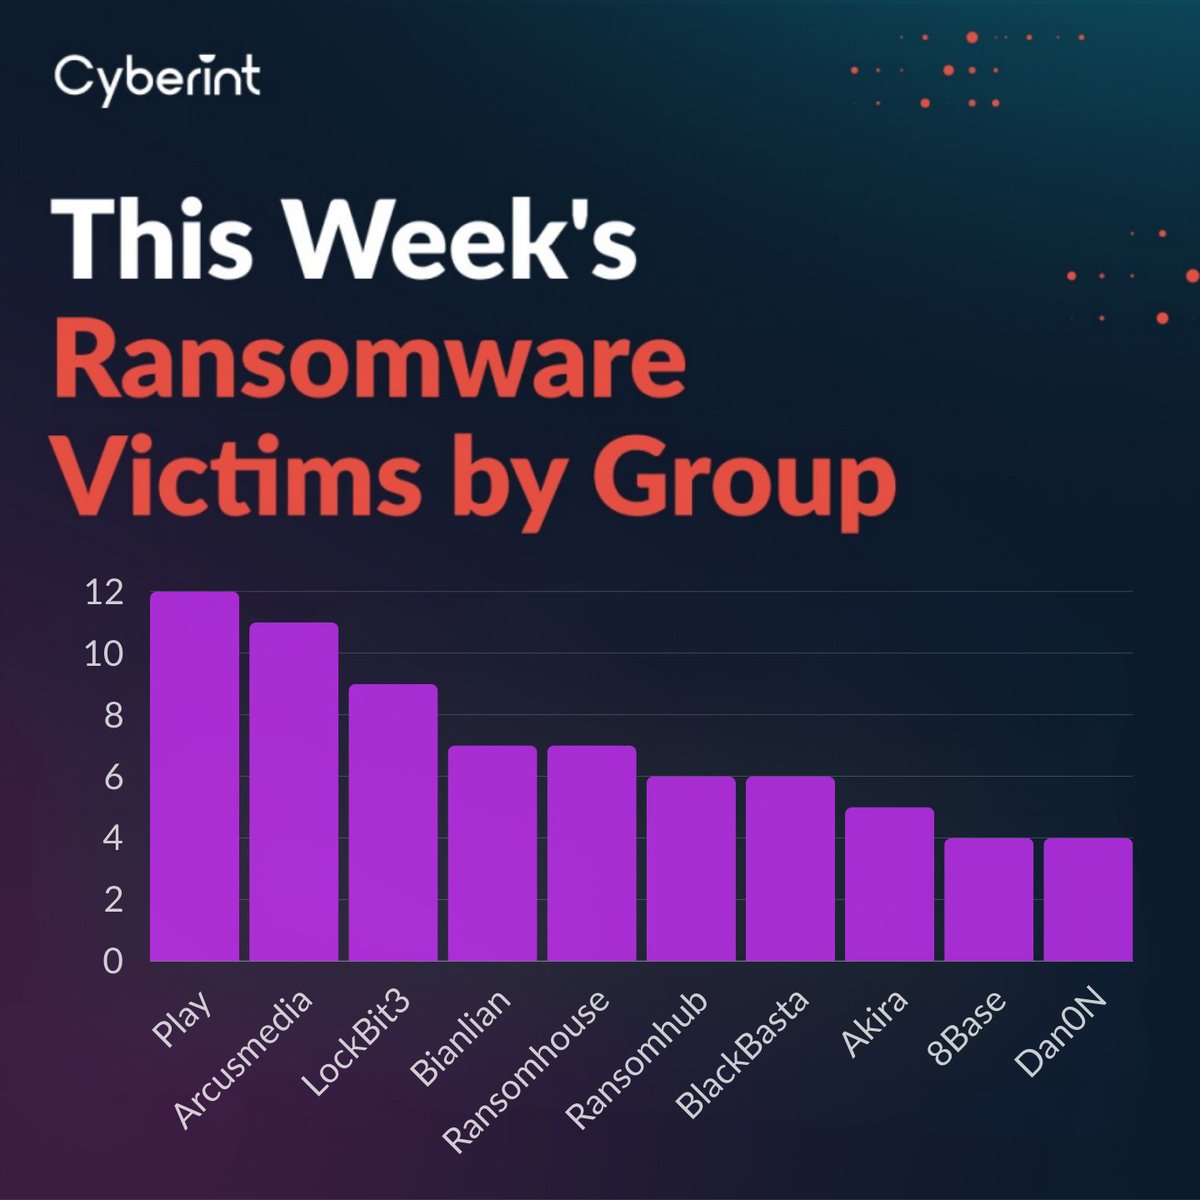 This week's #ransomware victims by group. Note that #LockBit3 still appears in the top 3 and #Arcusmedia has entered the top 3.
Read the full weekly report for much more:
hubs.la/Q02yw_t30